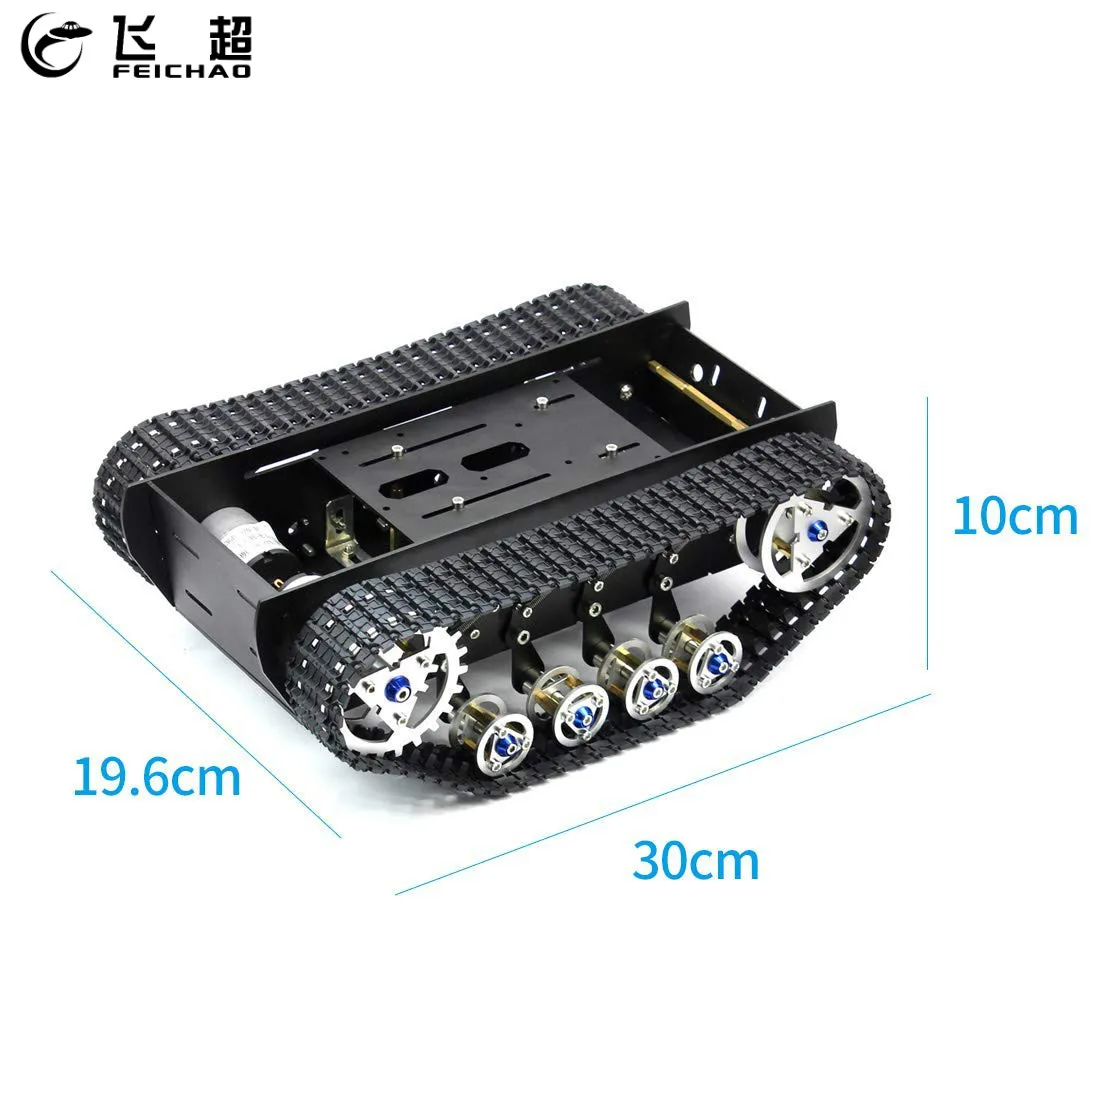 Handmade DIY Kit Robot Tank Truck Chassis Light Shock Absorbed Damping Balance Tank Robot Chassis for Arduino Spare Parts